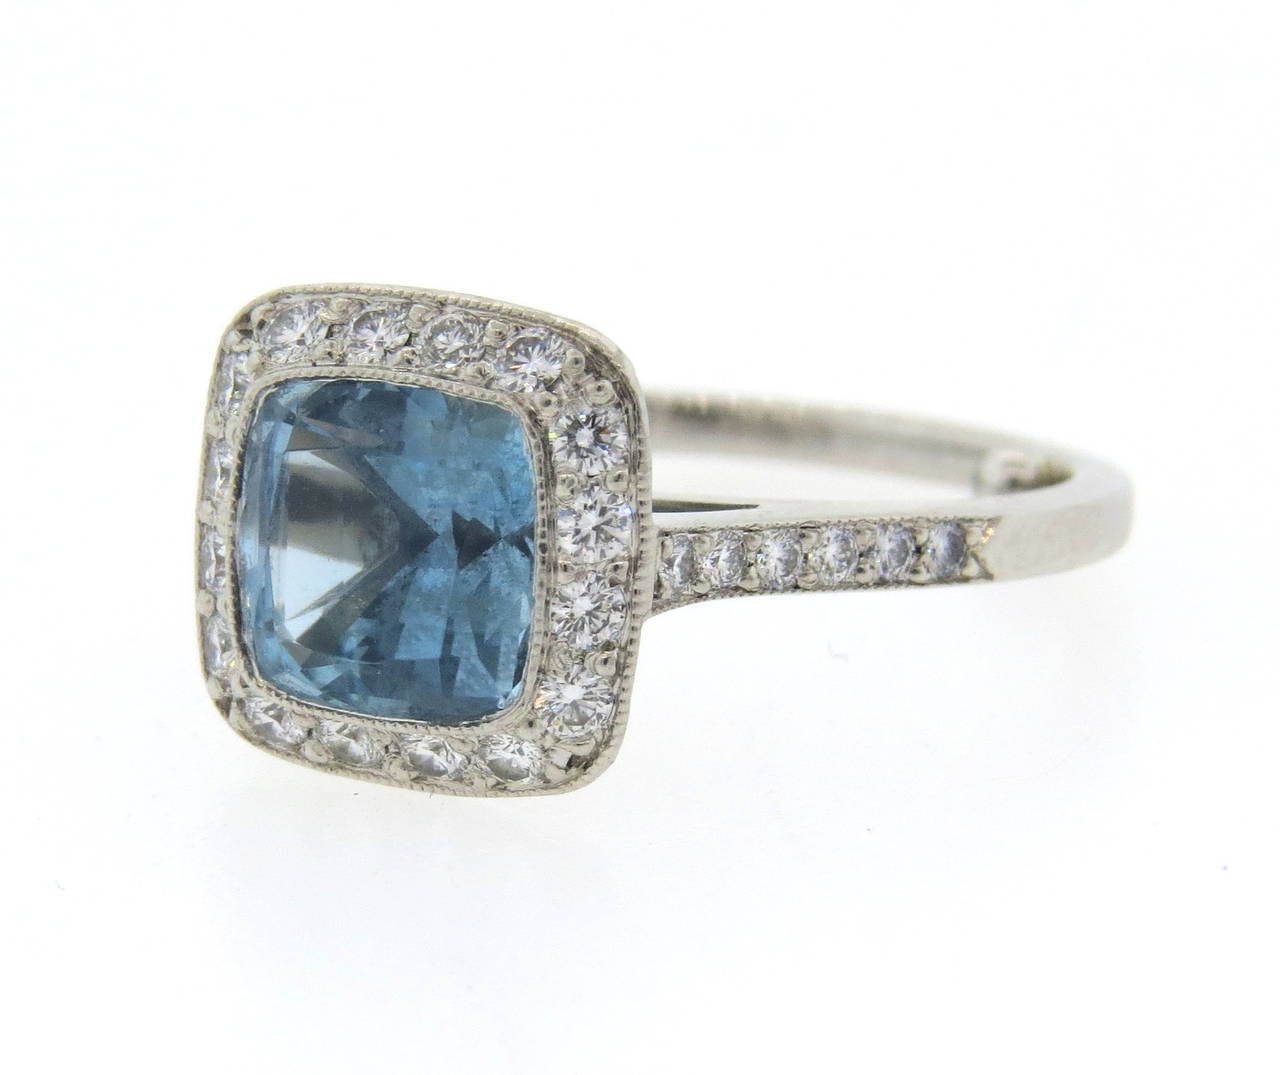 Tiffany & Co platinum ring from Legacy collection with diamonds and aquamarine. Ring size 5 (sizing balls can be removed to increase size) , ring top is 11mm x 11mm.  Marked Tiffany & Co, pt950, pat.D467.833 et al, 24294498. Weight - 5.5gr.